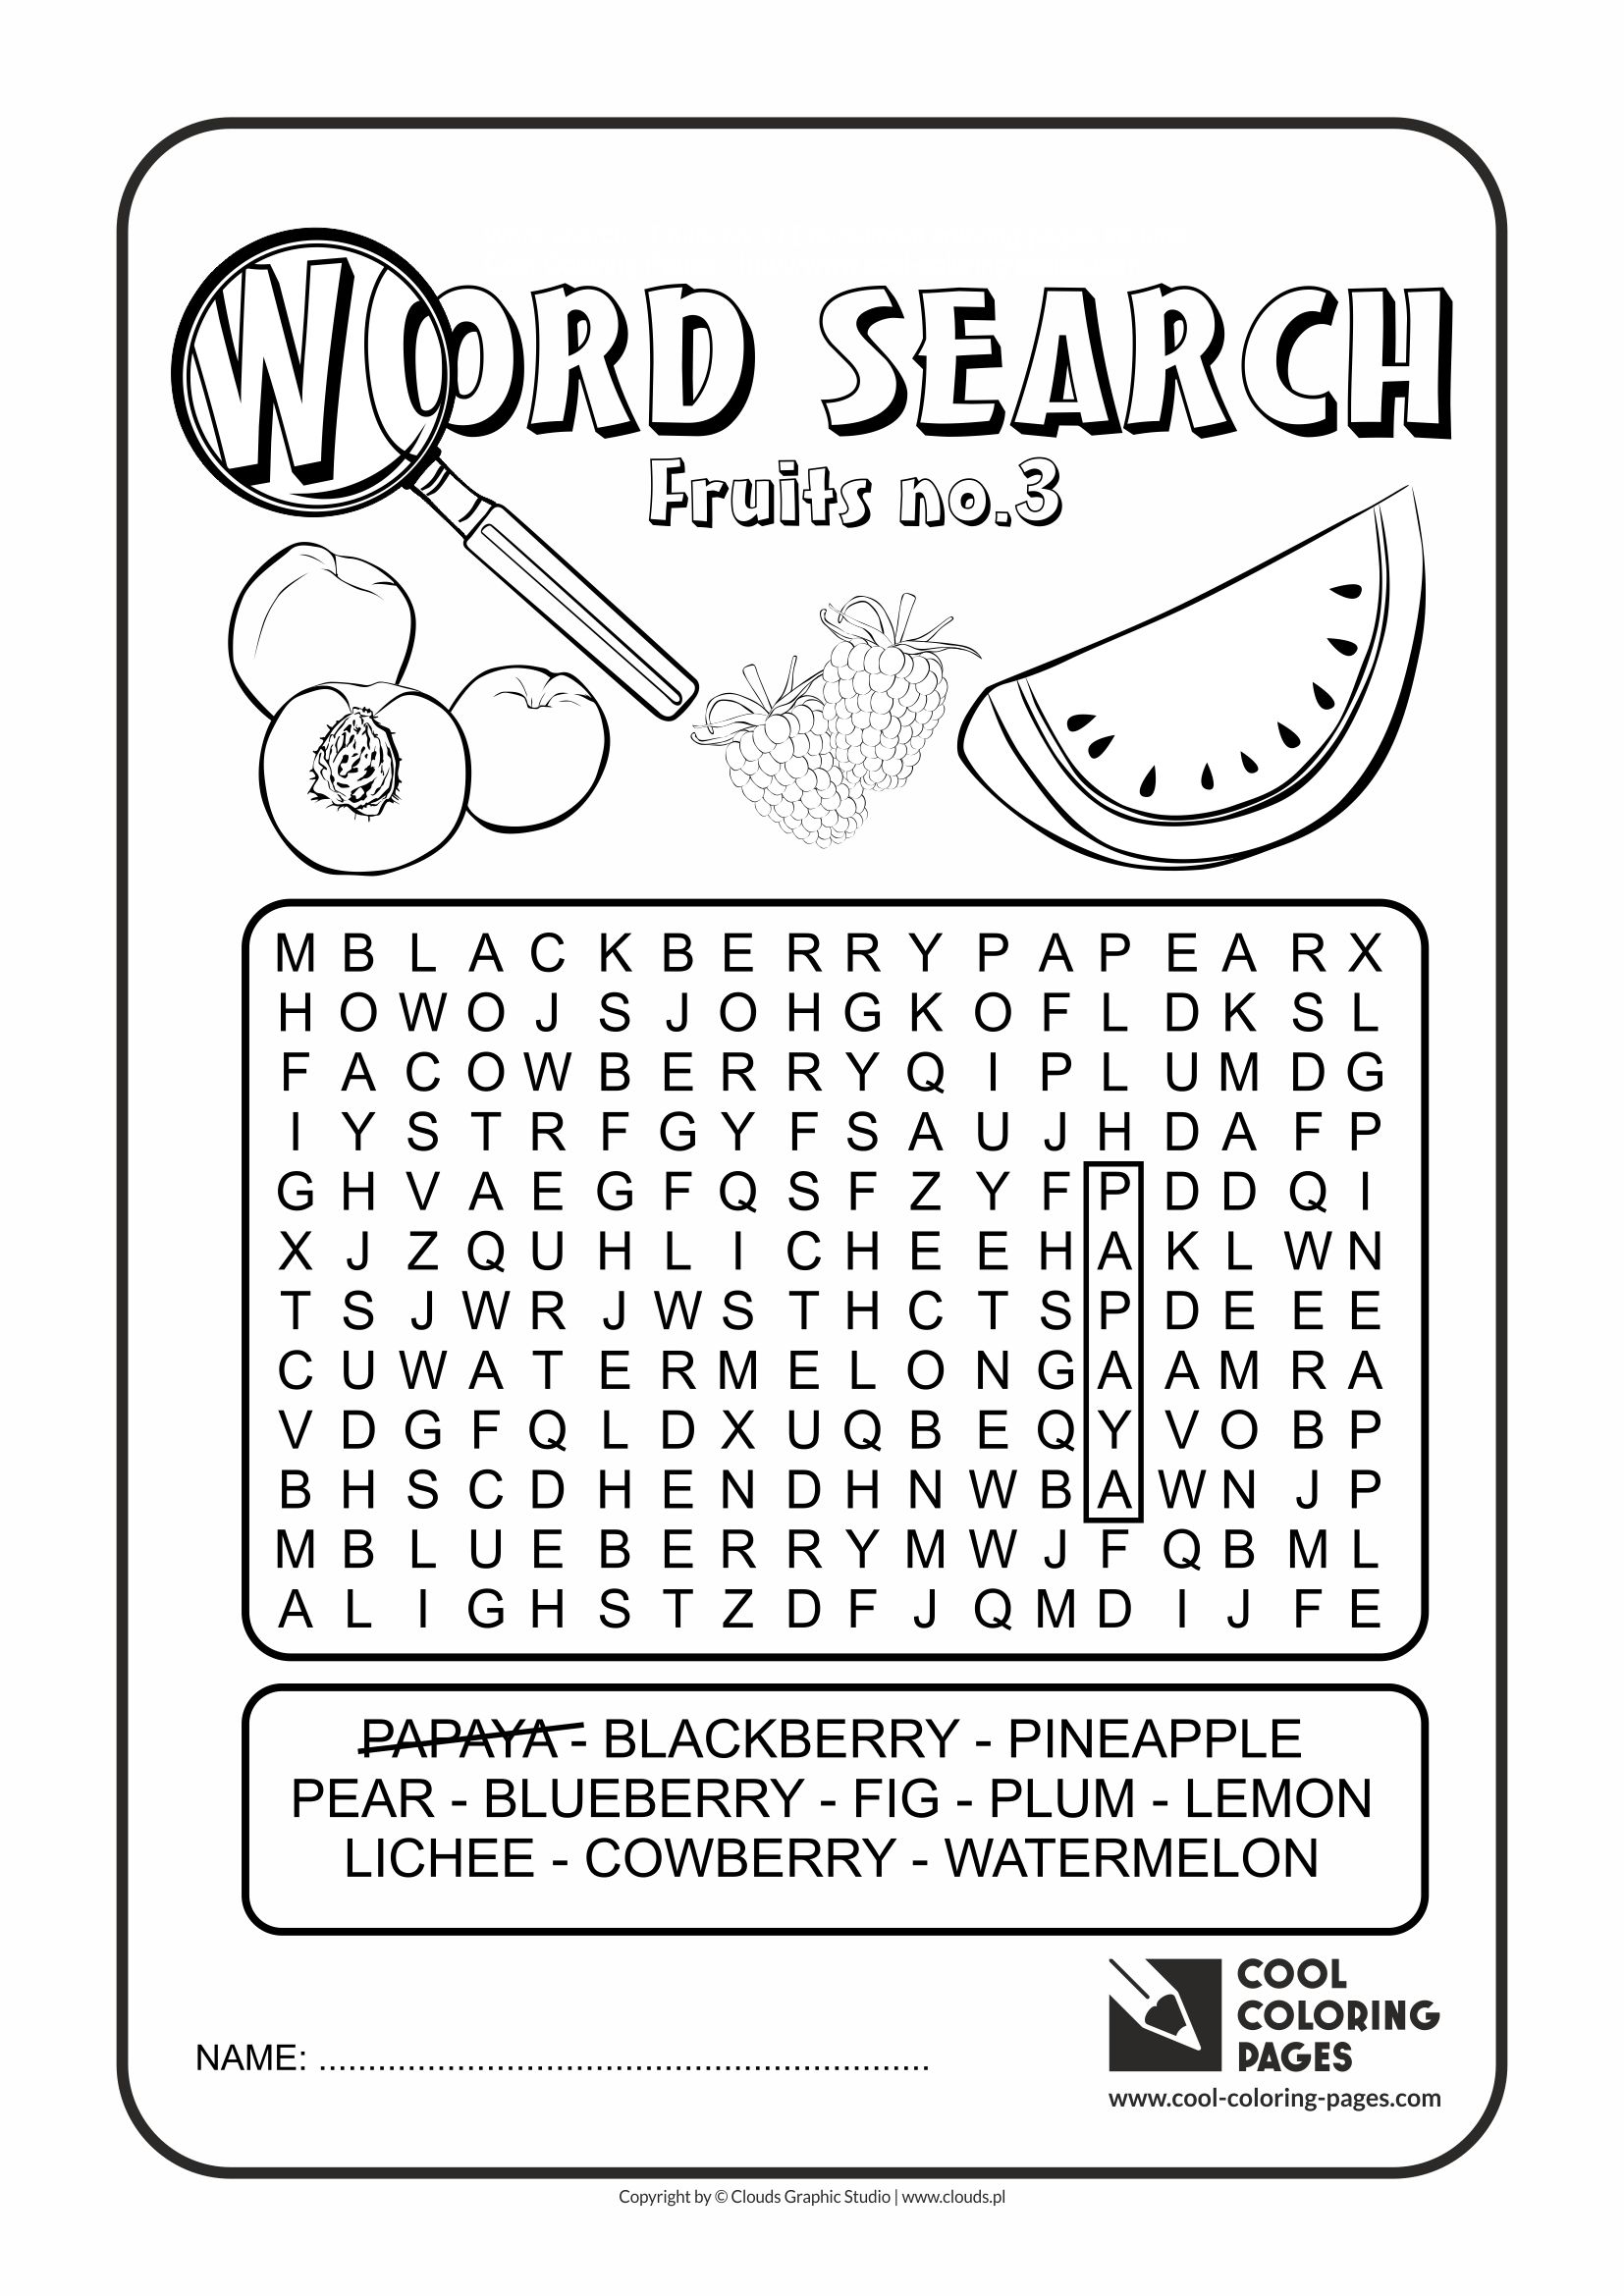 Cool Coloring Pages - Word search / Word search fruits no 3 / Coloring page with word search fruits no 3